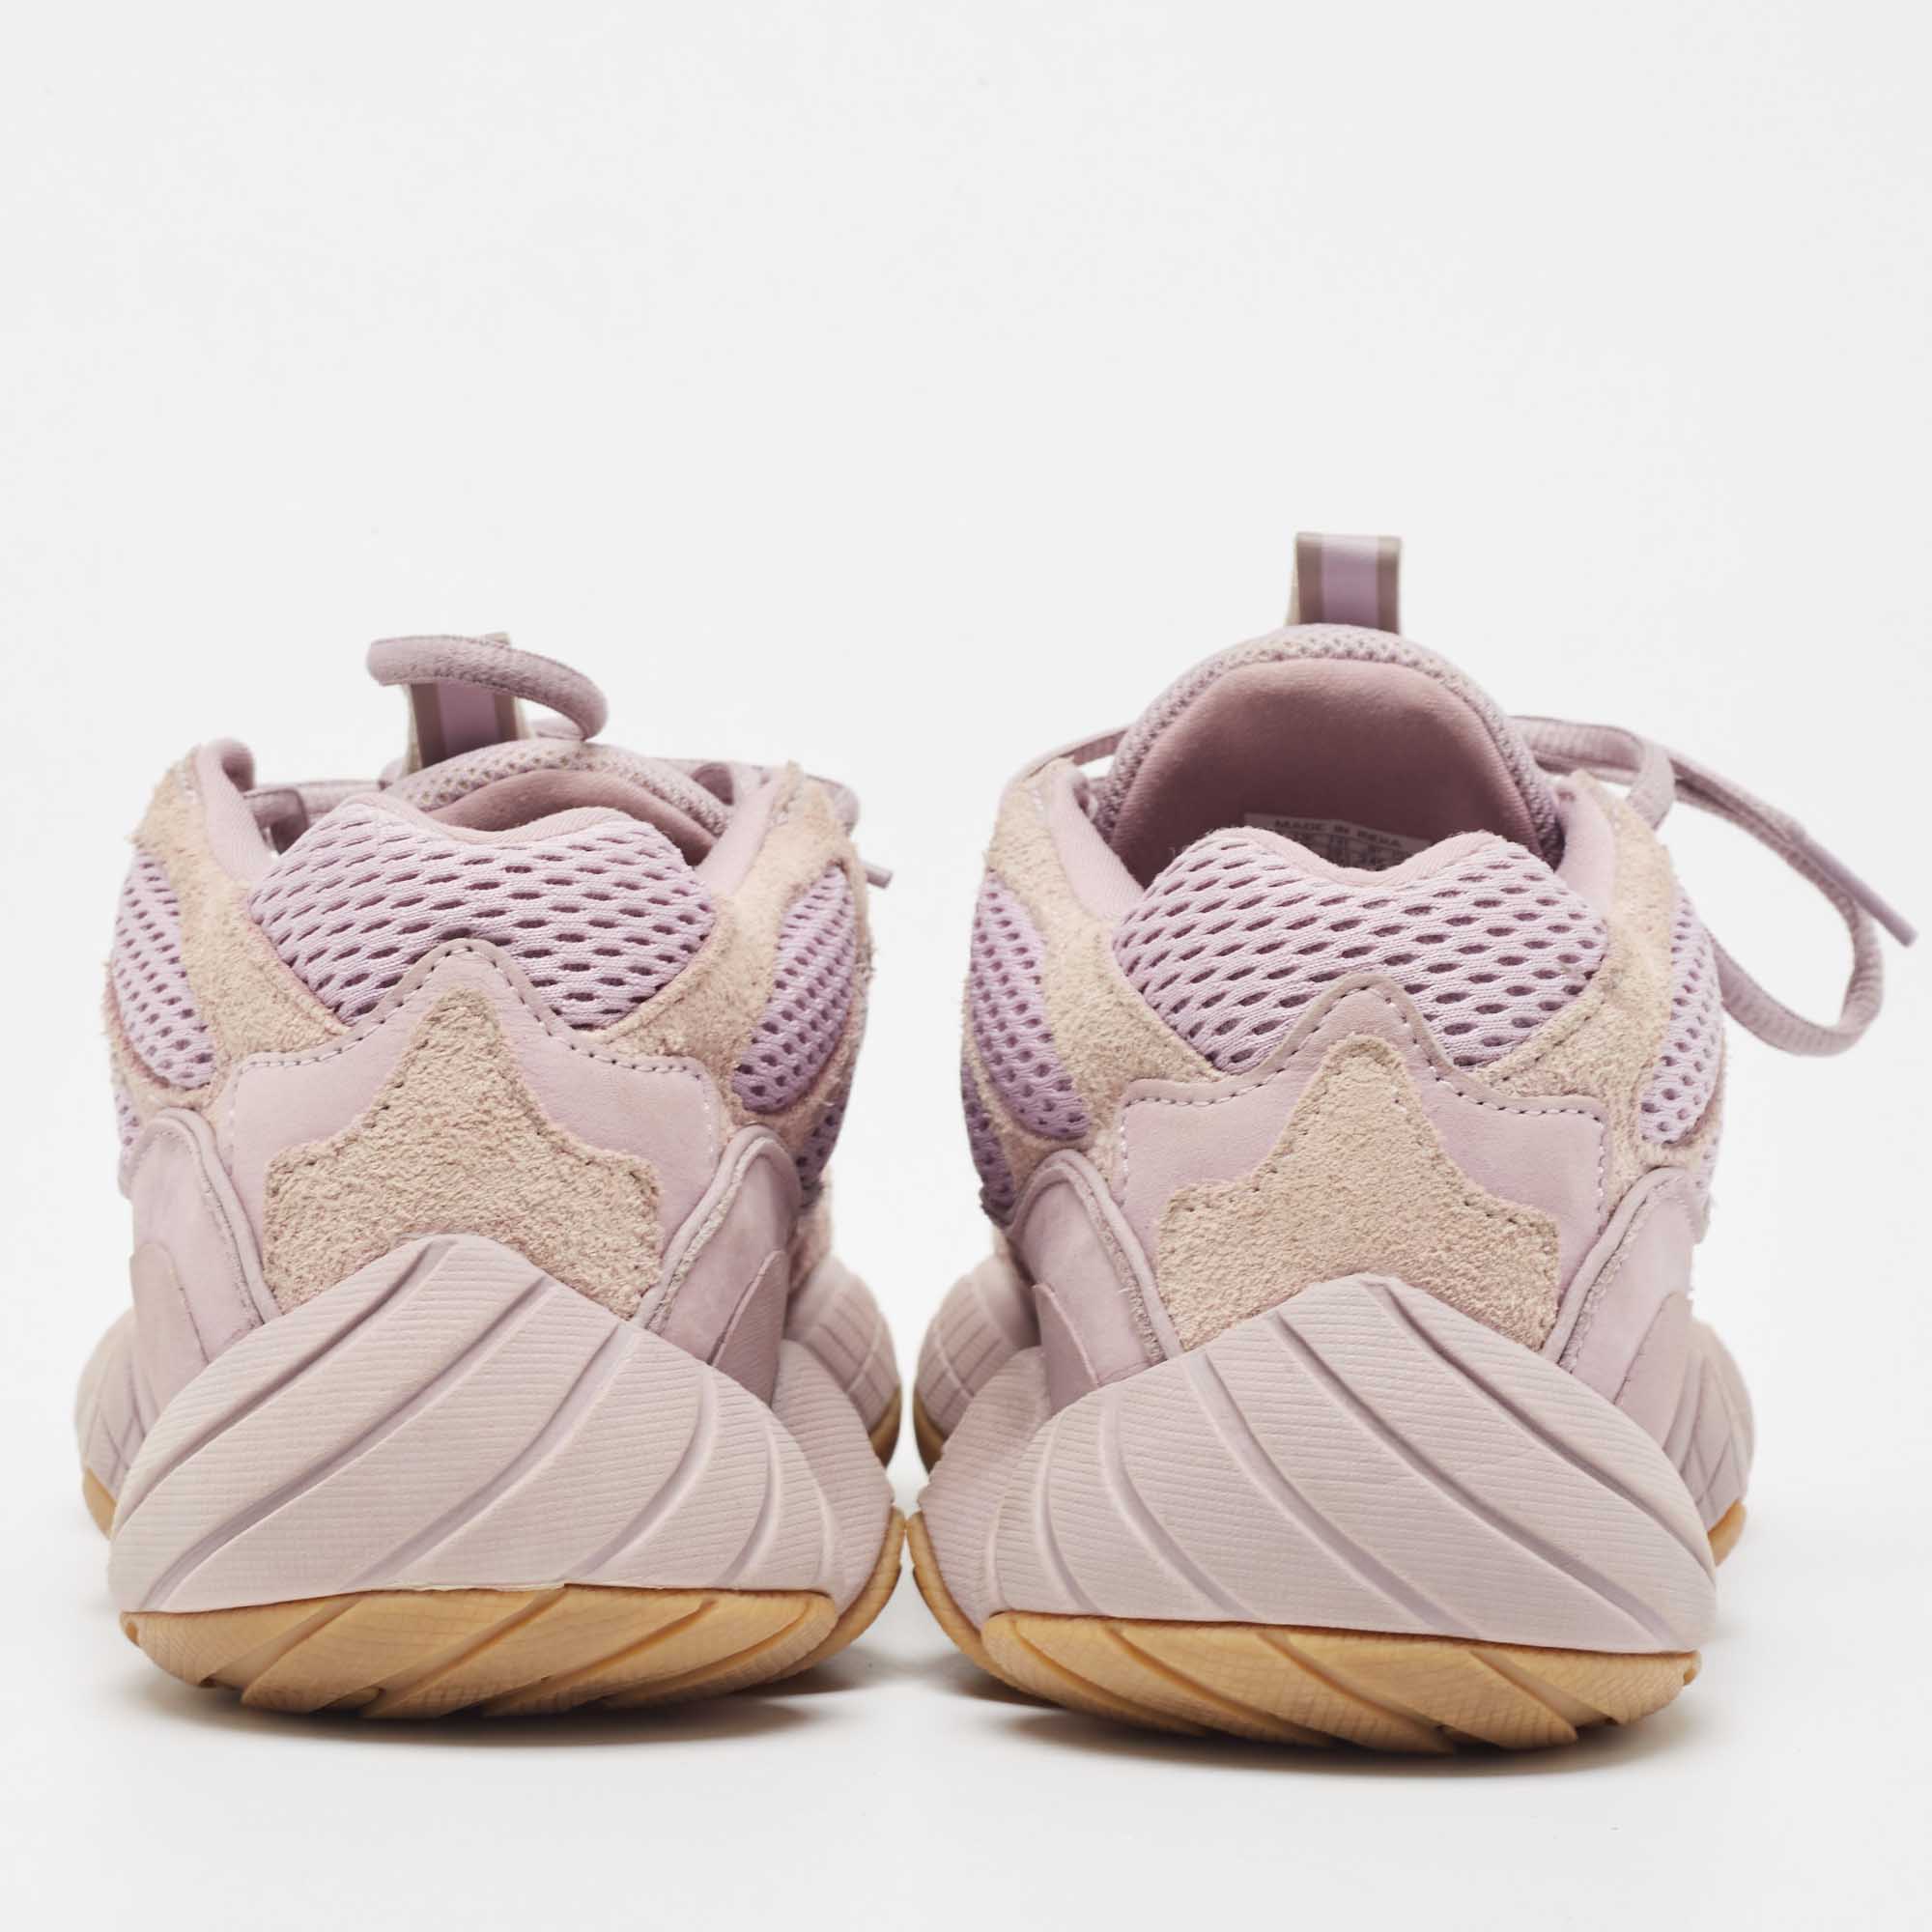 Adidas X Yeezy Purple Mesh And Suede Boost Yeezy 500 Soft Vision Sneakers Size 39.5